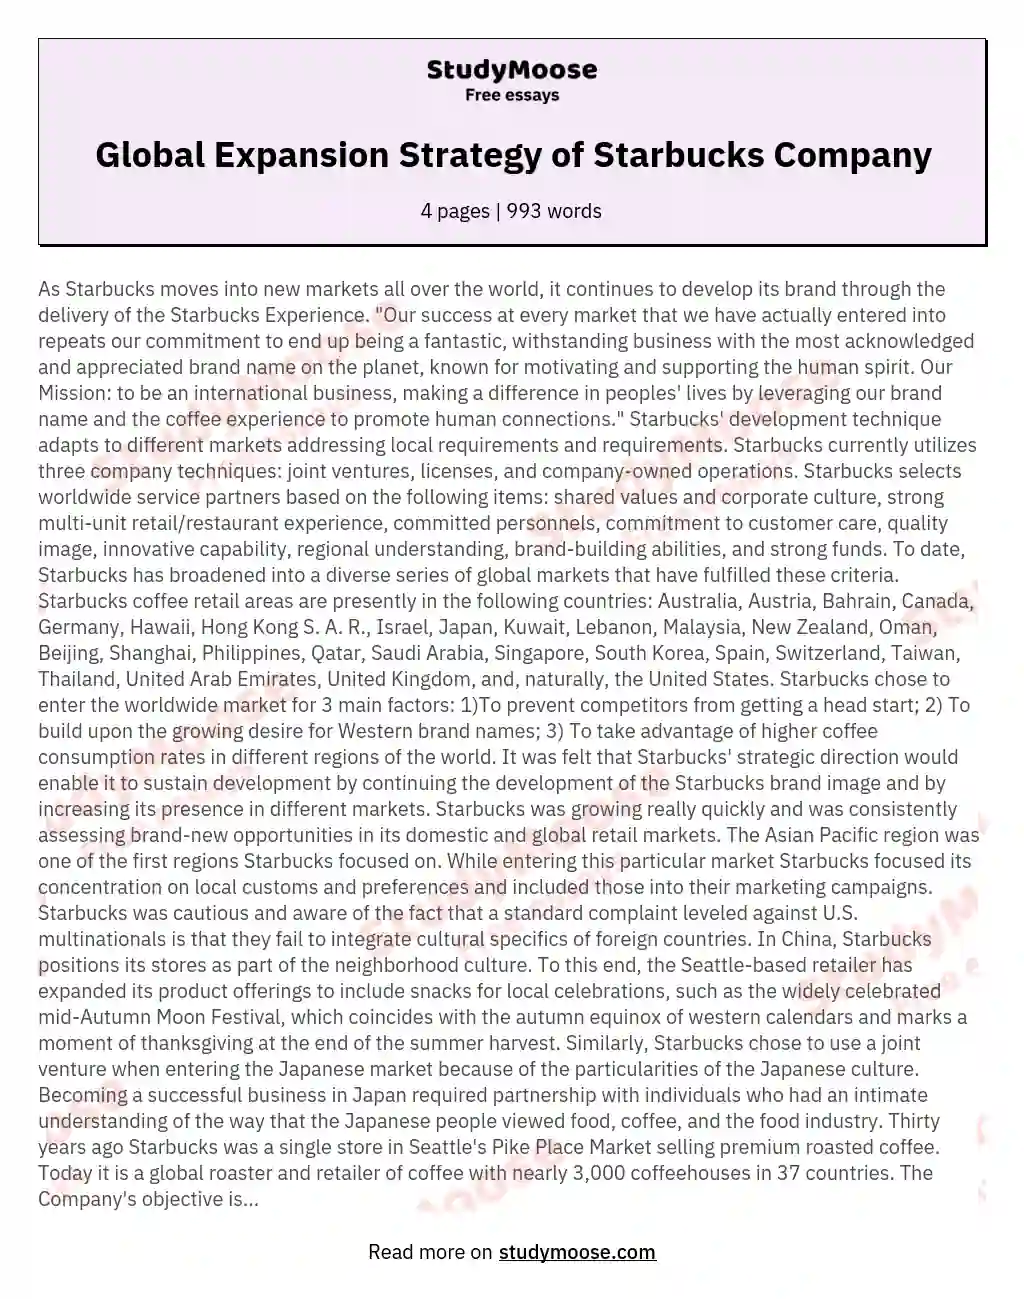 Global Expansion Strategy of Starbucks Company